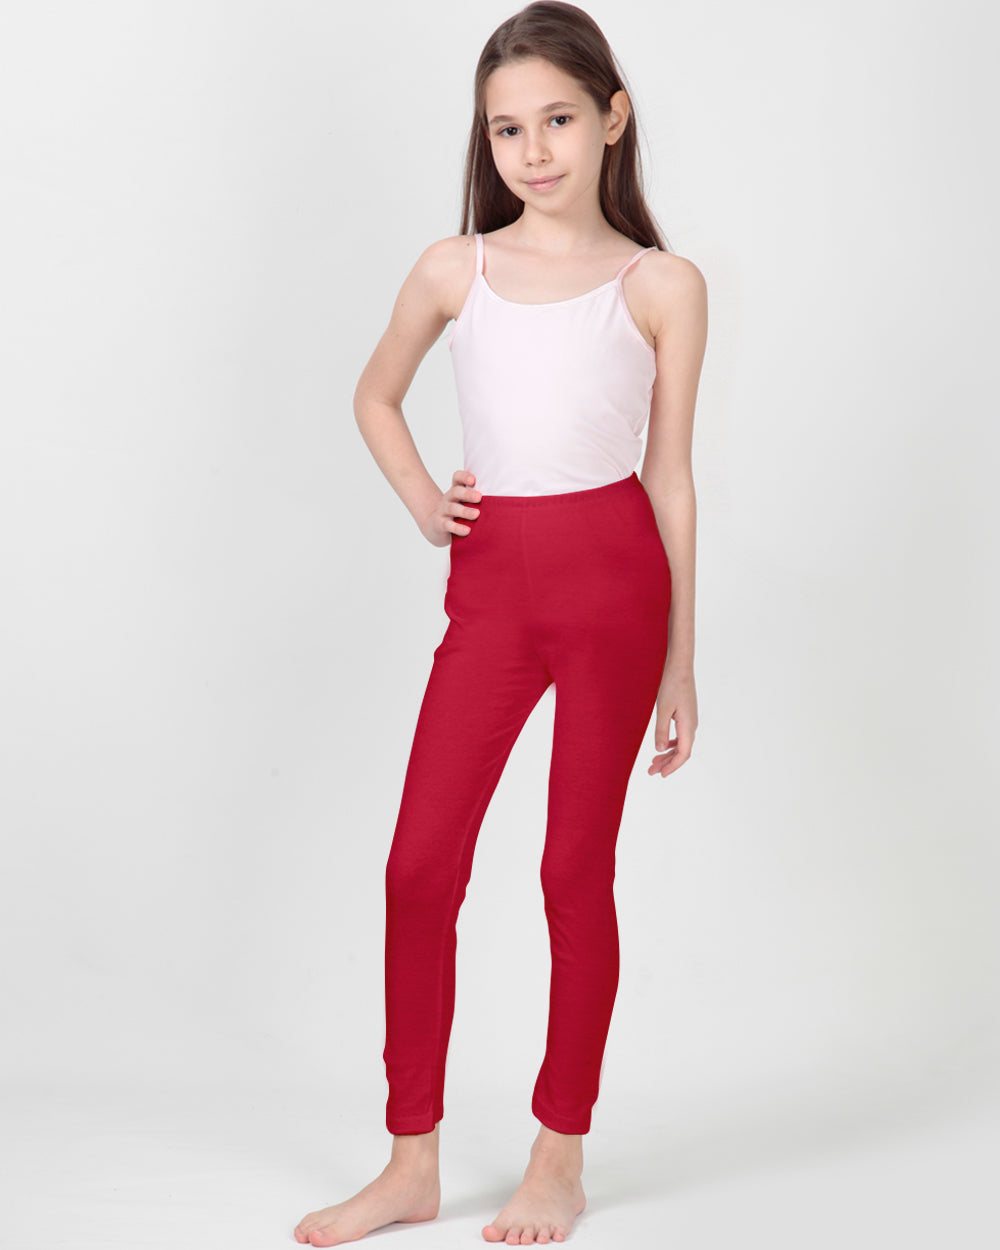 100% Organic Cotton High Waisted Ankle Length Leggings for Girls - Red